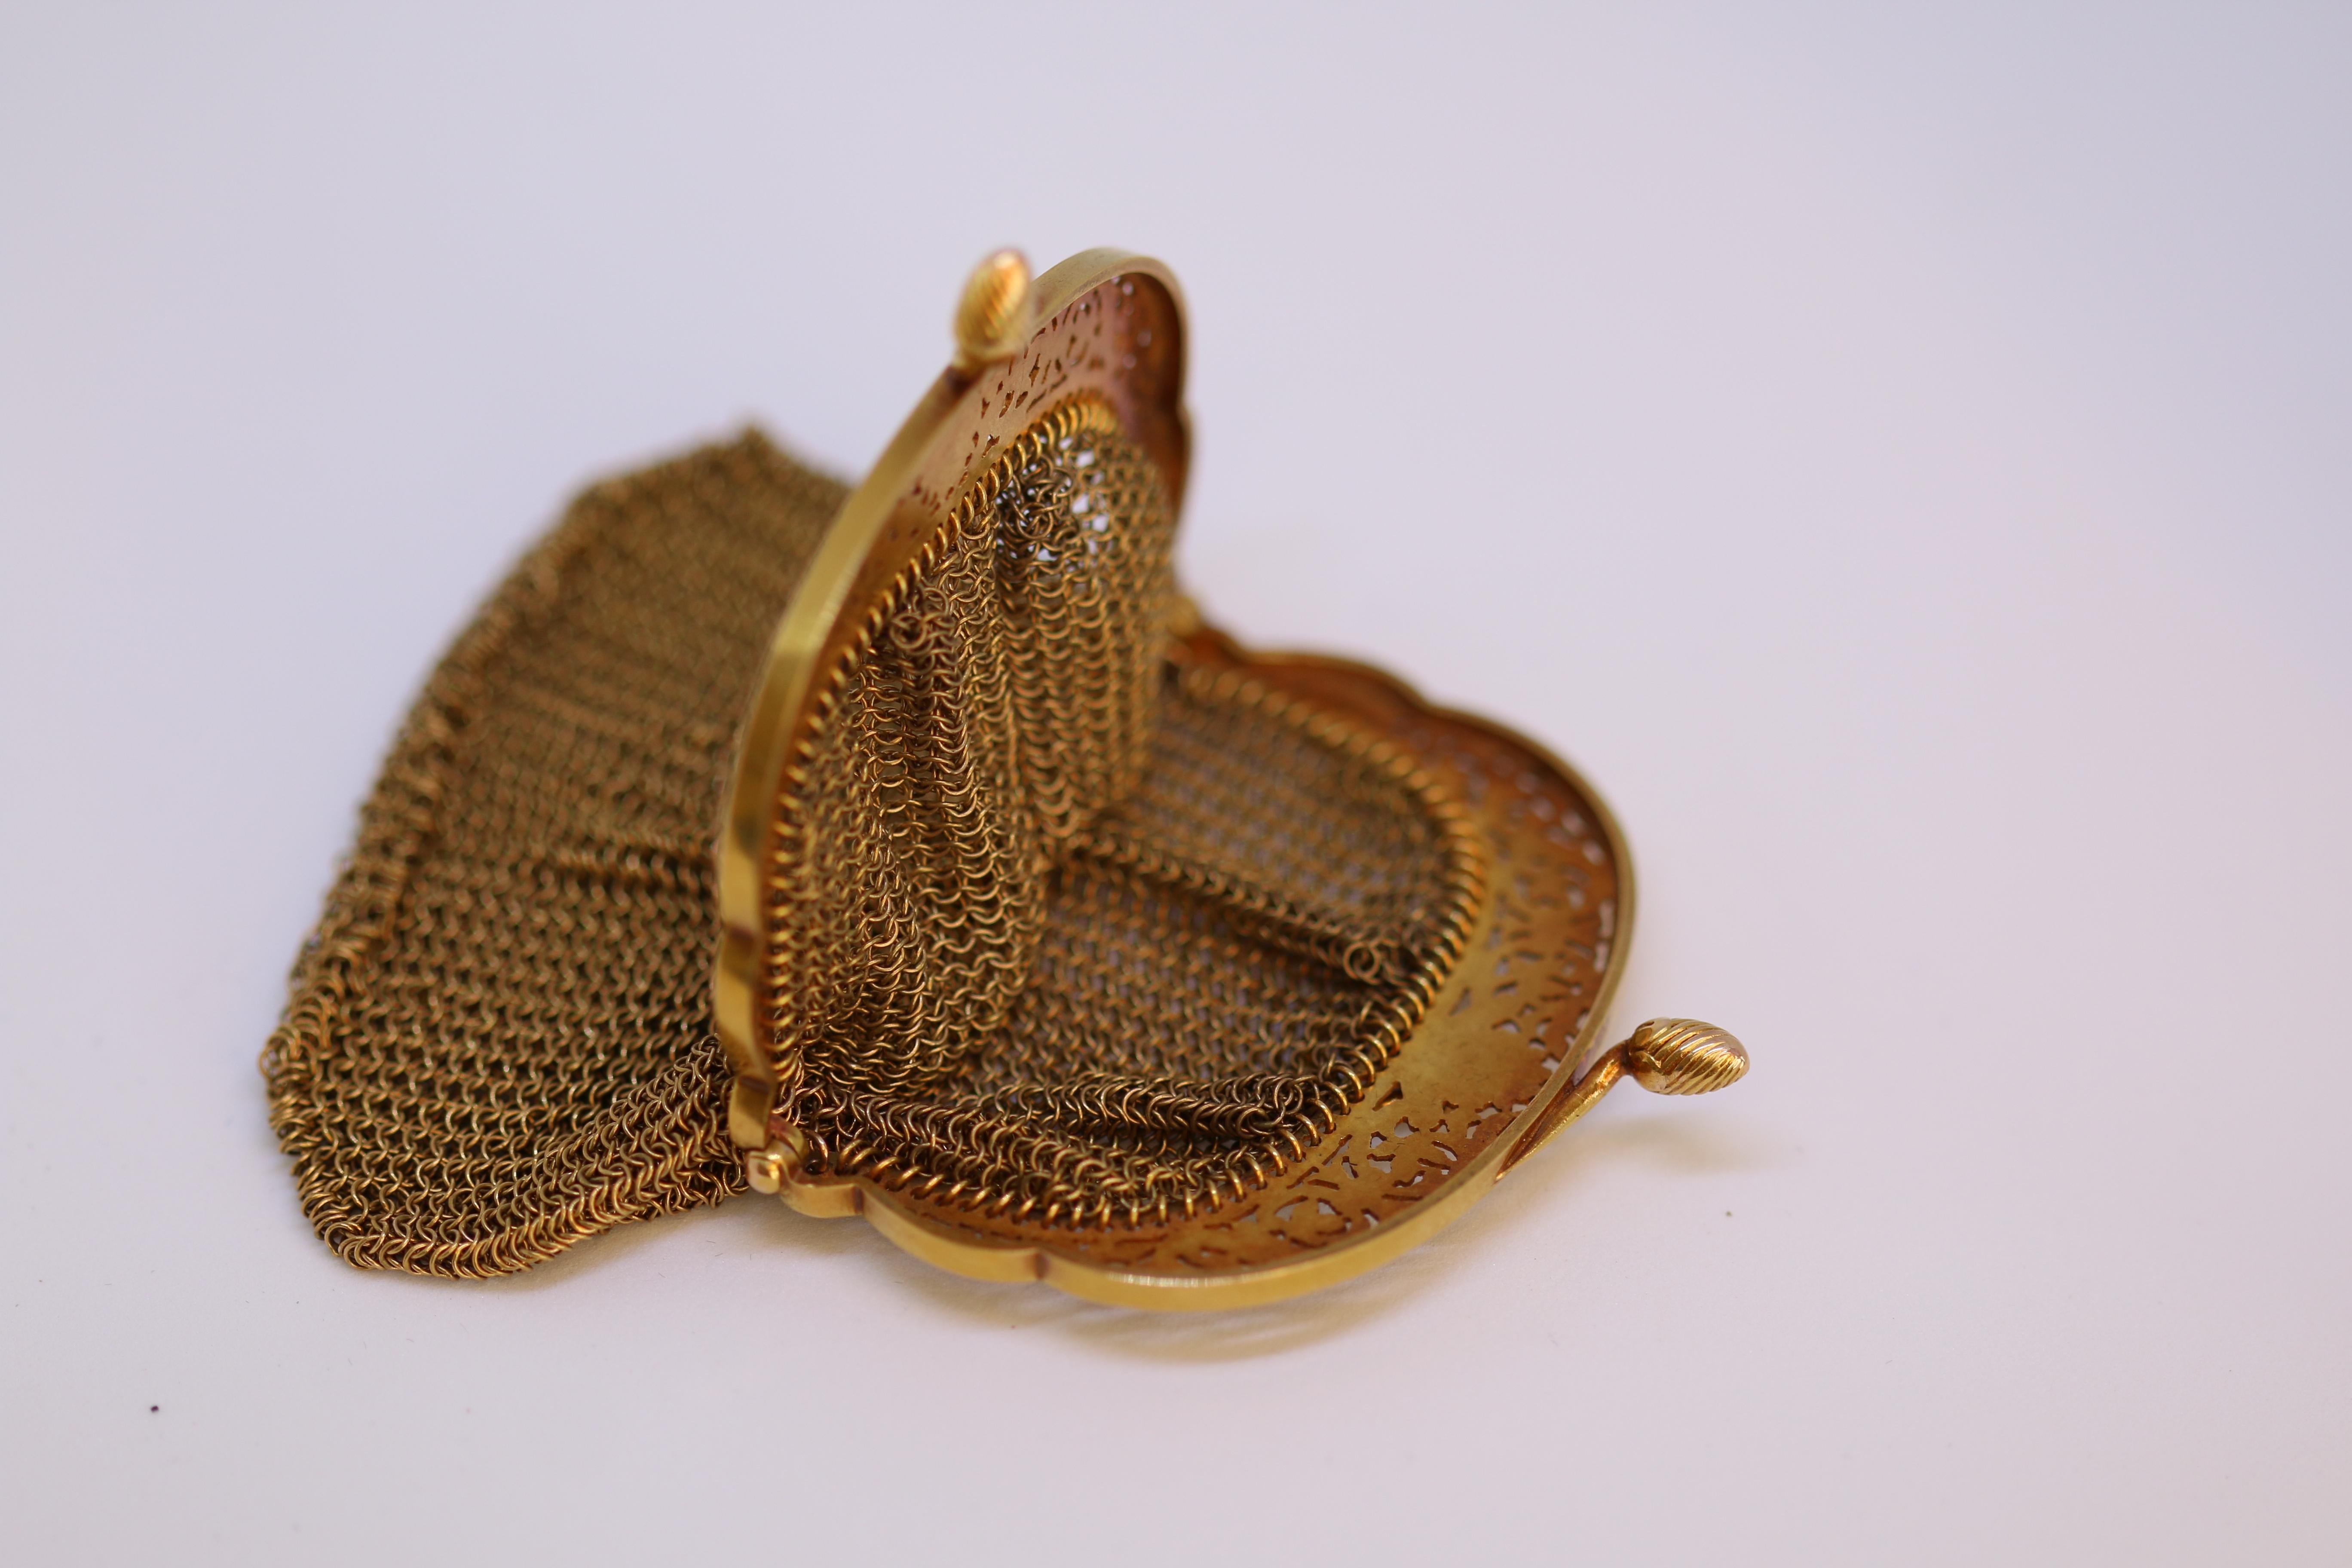 This exquisite yellow gold mesh purse will delight you every time you hold it in your hand. There is something quite pleasing to the contradiction between the visible lightness of the mesh and the reassuring weight when you feel the smooth links in